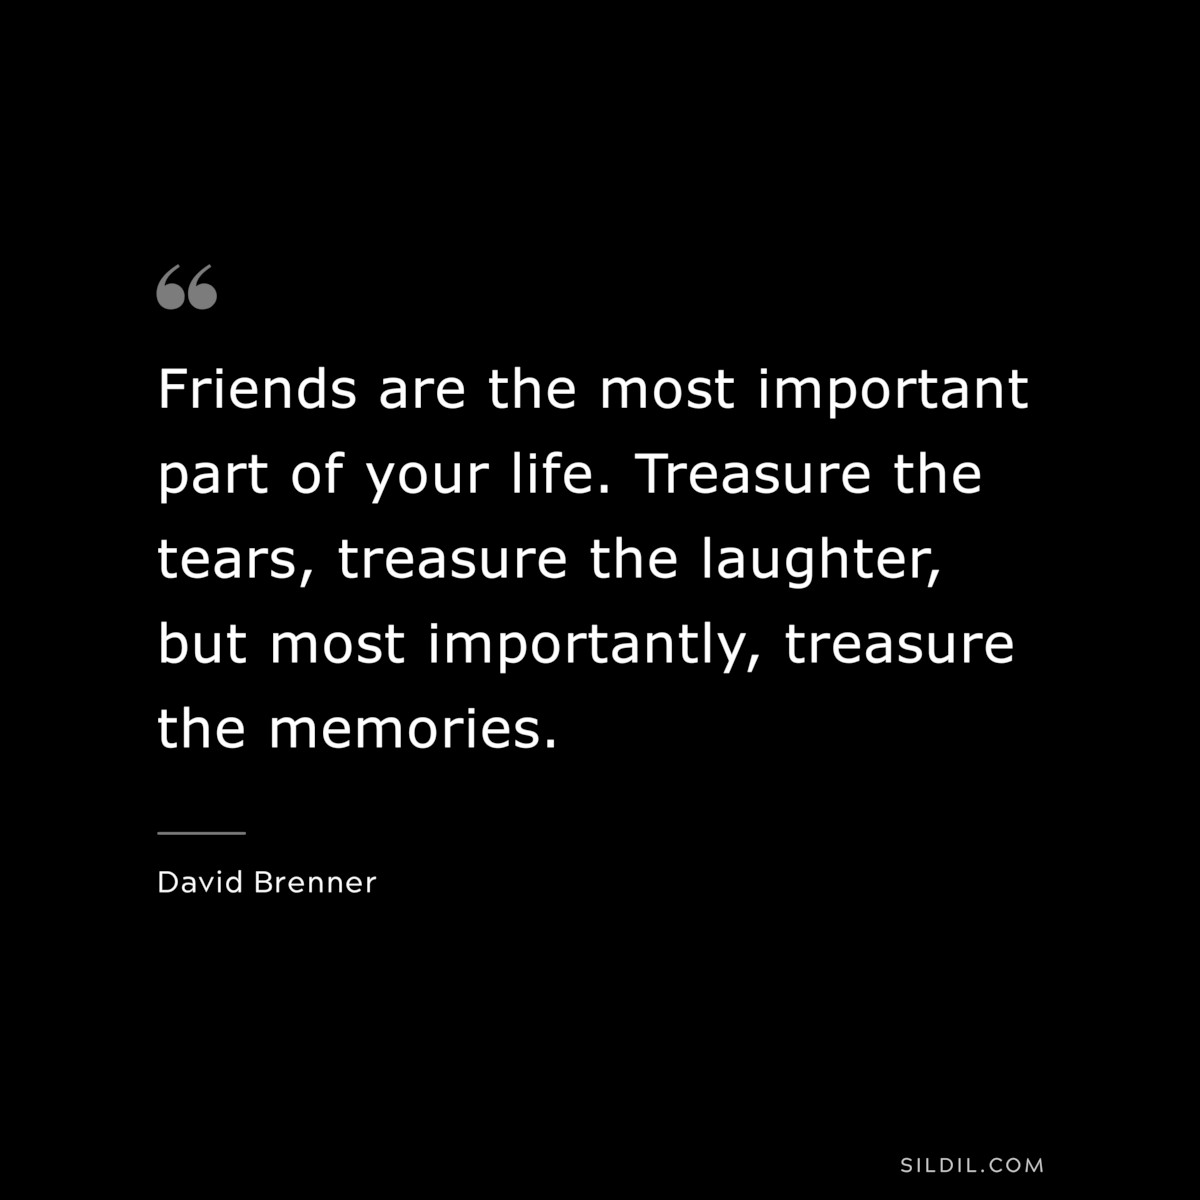 Friends are the most important part of your life. Treasure the tears, treasure the laughter, but most importantly, treasure the memories. ― David Brenner